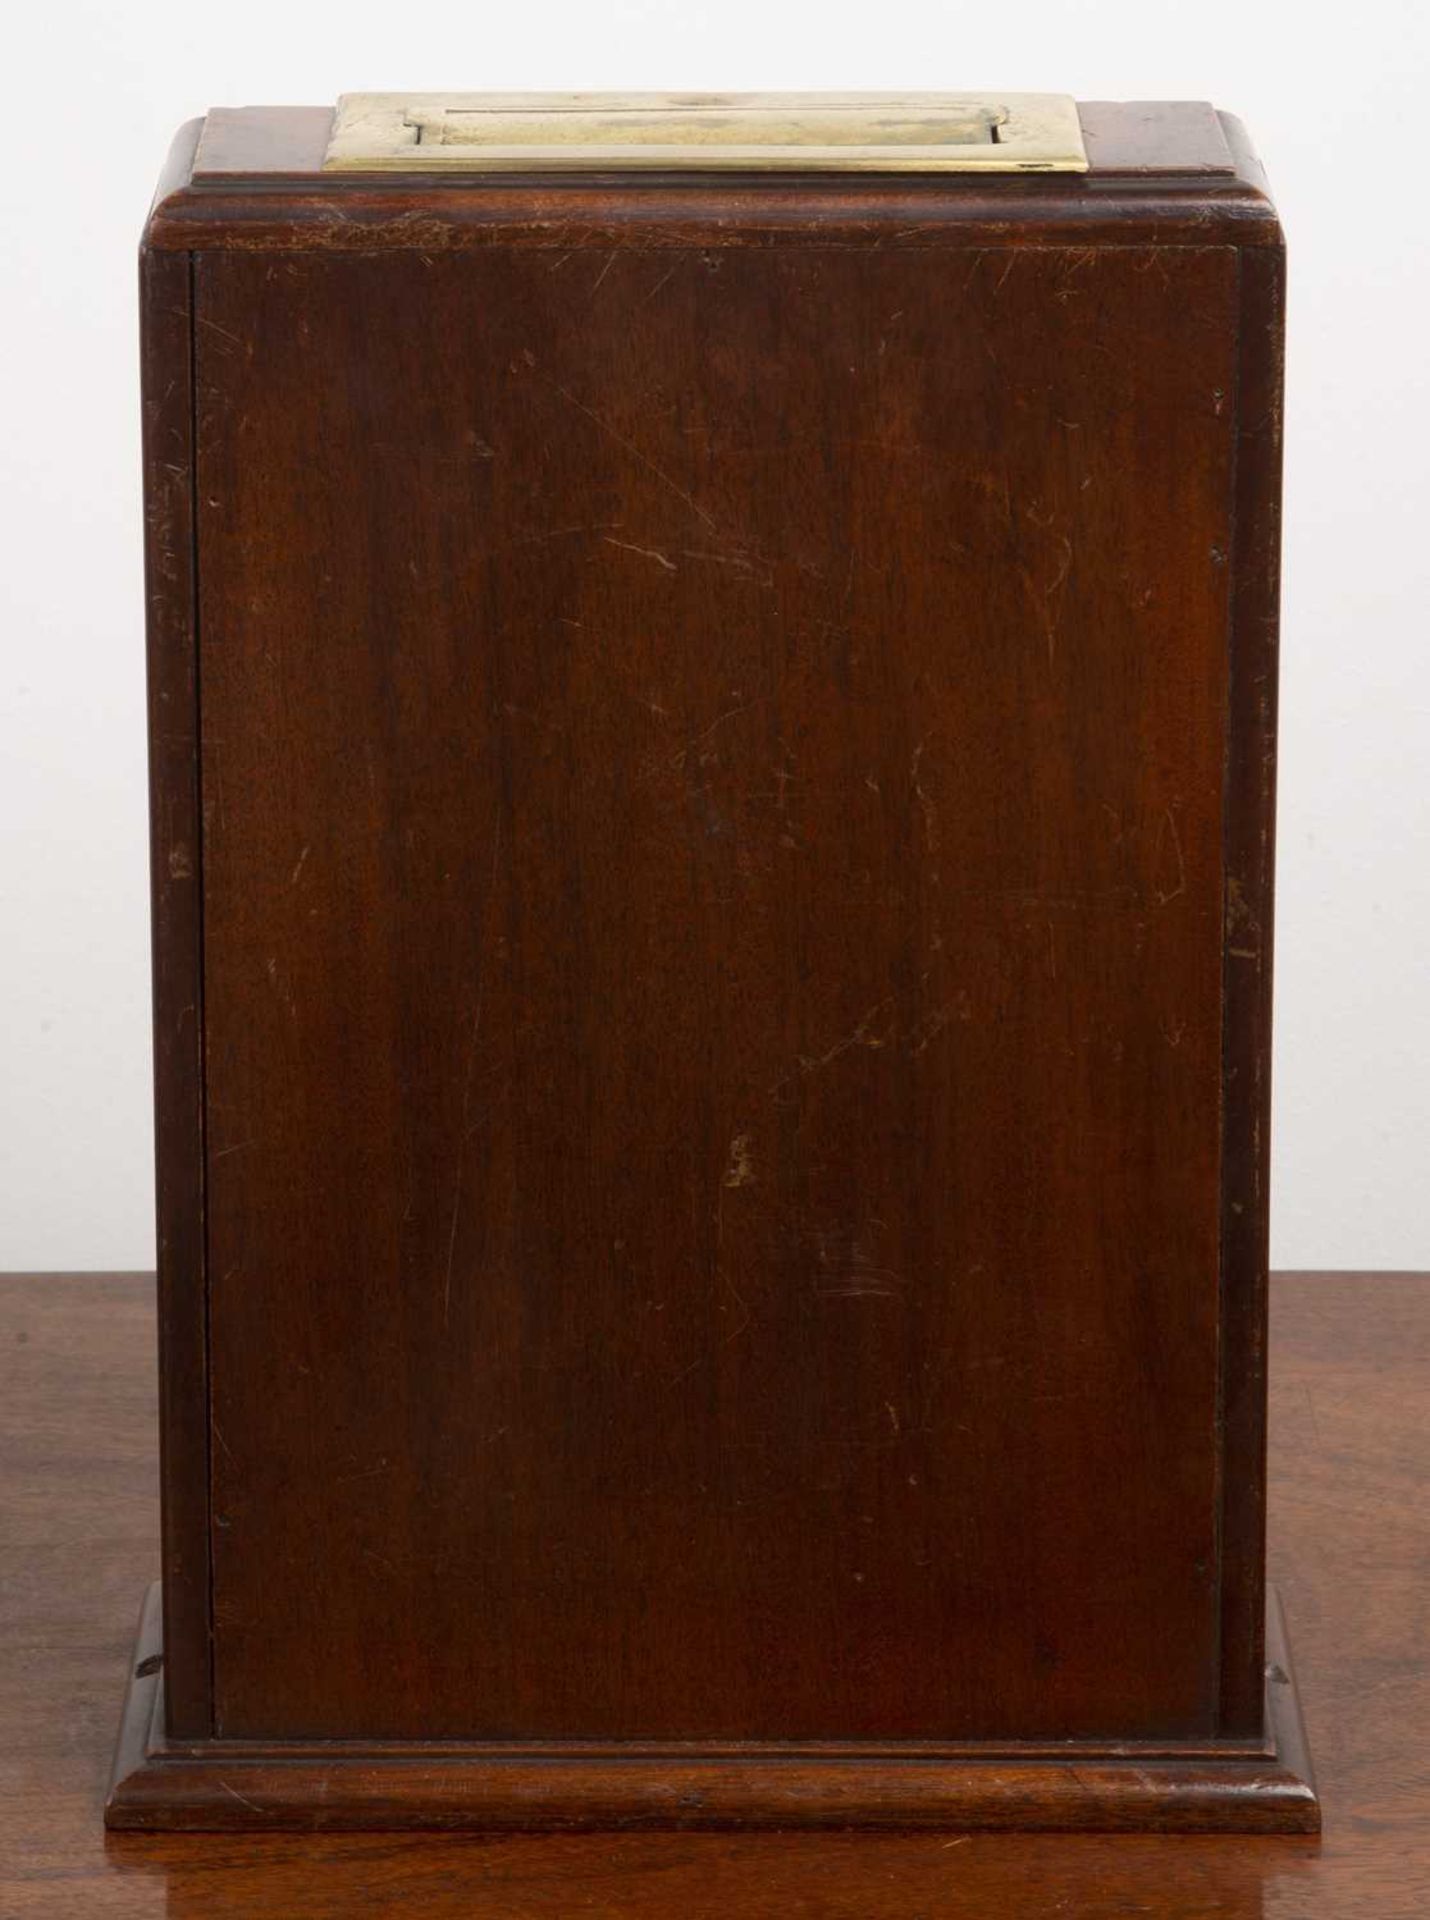 Mahogany and brass fronted ballot/vote box late 19th/early 20th Century, 25cm wide x 34cm high x - Image 5 of 5